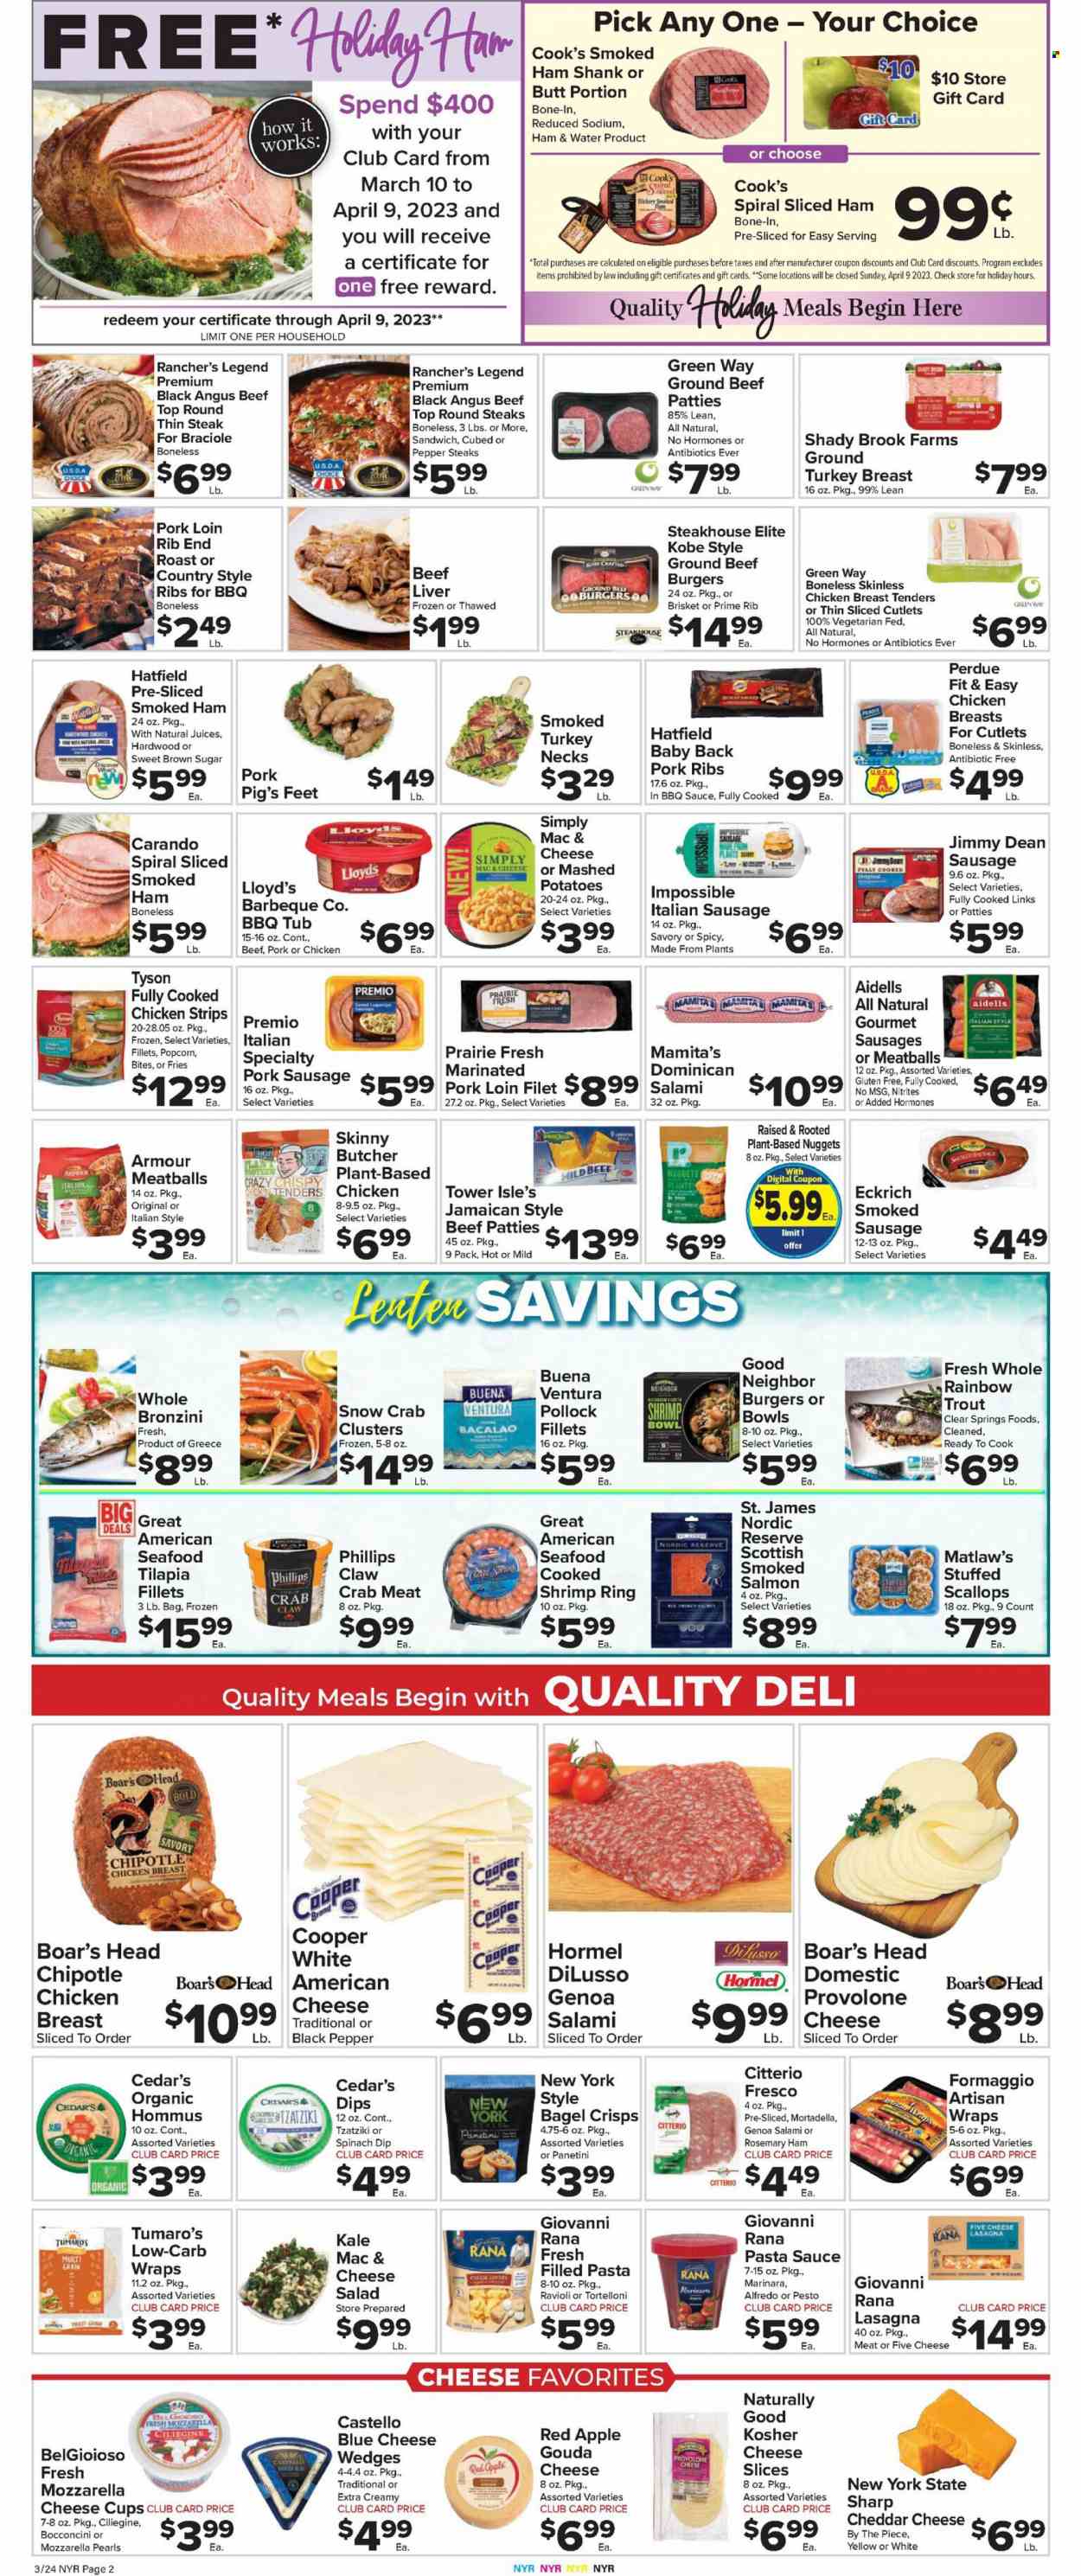 thumbnail - Foodtown Flyer - 03/24/2023 - 03/30/2023 - Sales products - wraps, kale, salad, crab meat, salmon, scallops, smoked salmon, tilapia, trout, pollock, seafood, crab, shrimps, mashed potatoes, ravioli, pasta sauce, chicken tenders, meatballs, sandwich, nuggets, hamburger, beef burger, lasagna meal, Giovanni Rana, Perdue®, Rana, Jimmy Dean, Hormel, filled pasta, brisket, roast, mortadella, salami, ham, ham shank, smoked ham, sausage, smoked sausage, pork sausage, italian sausage, tzatziki, hummus, blue cheese, bocconcini, gouda, sliced cheese, cheddar, cheese cup, Provolone, dip, spinach dip, strips, chicken strips, potato fries, popcorn, bagel crisps, cane sugar, rosemary, black pepper, BBQ sauce, pesto, juice, water, ground turkey, turkey breast, chicken, beef liver, beef meat, ground beef, steak, ribs, pork loin, pork meat, pork ribs, pork back ribs, country style ribs, cup. Page 4.